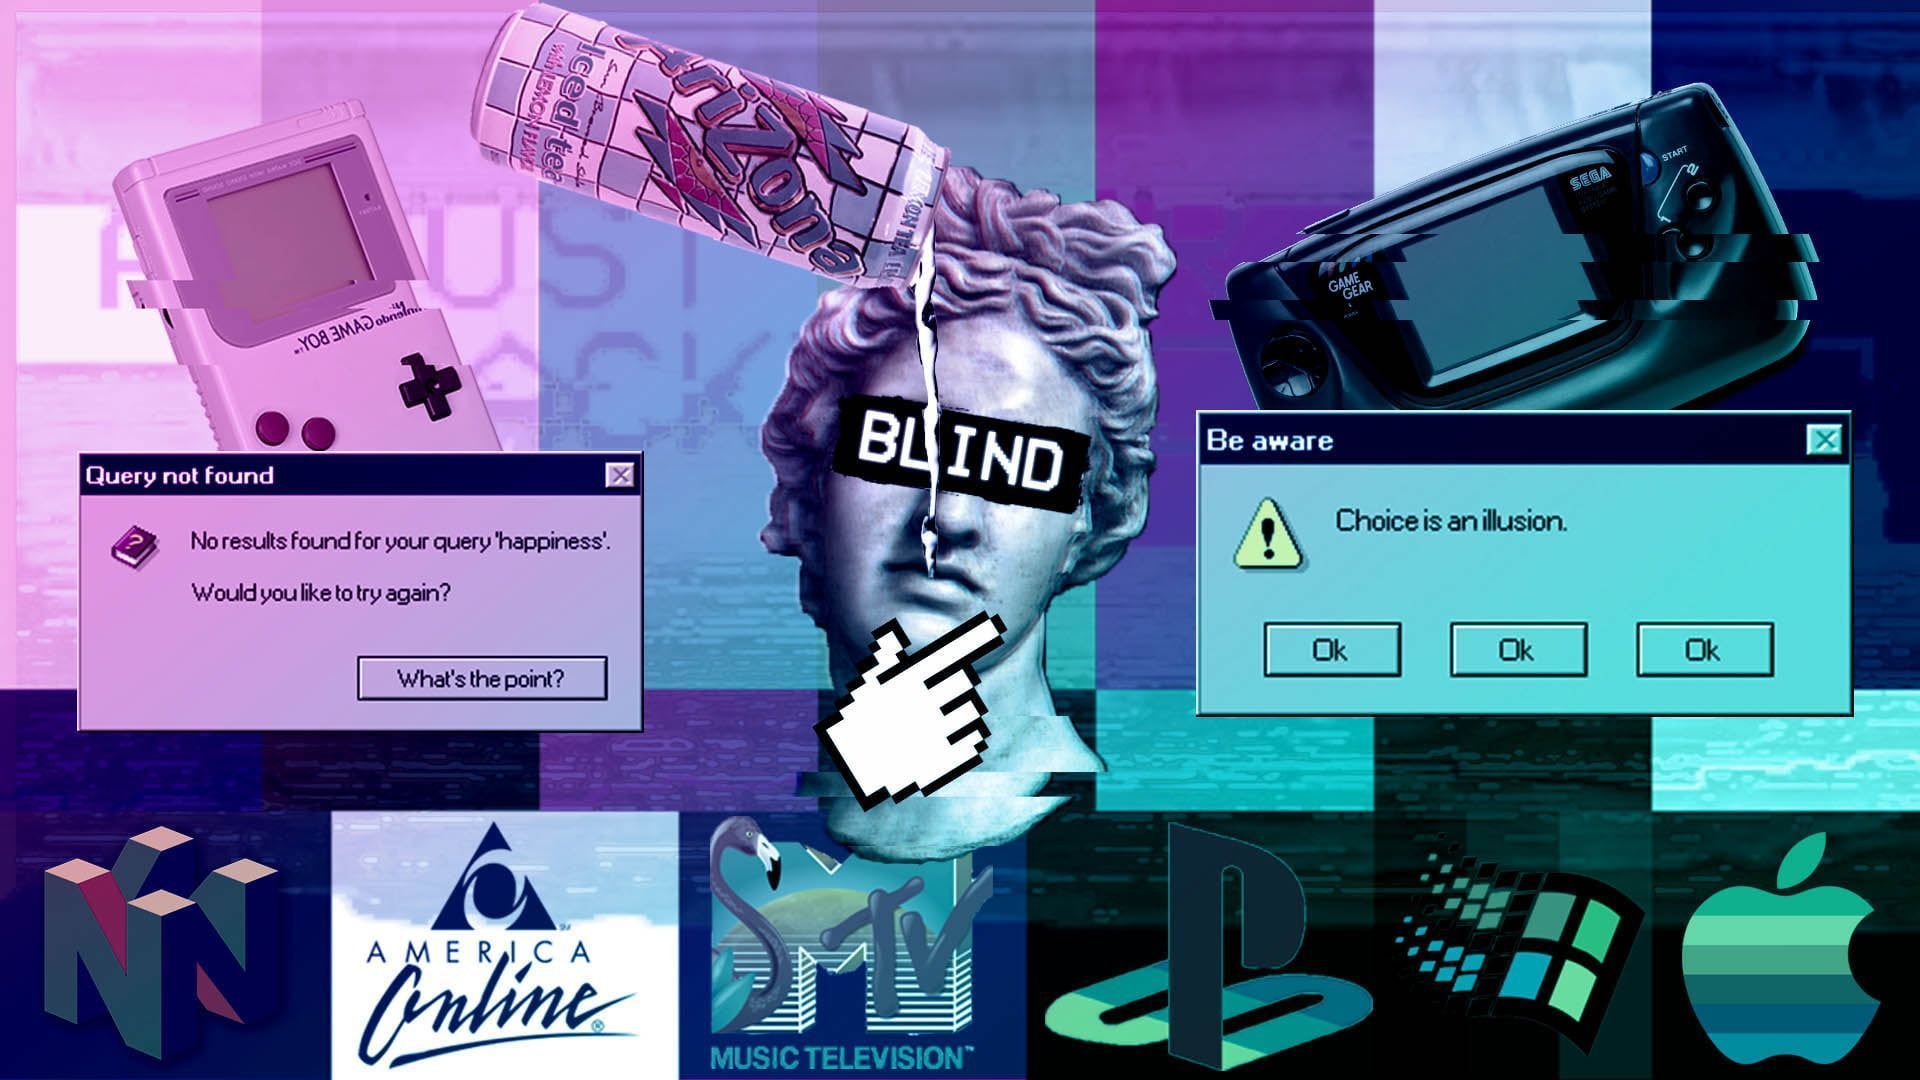 A collage of images with different objects on them - Greek statue, Windows 95, Windows 98, glitchcore